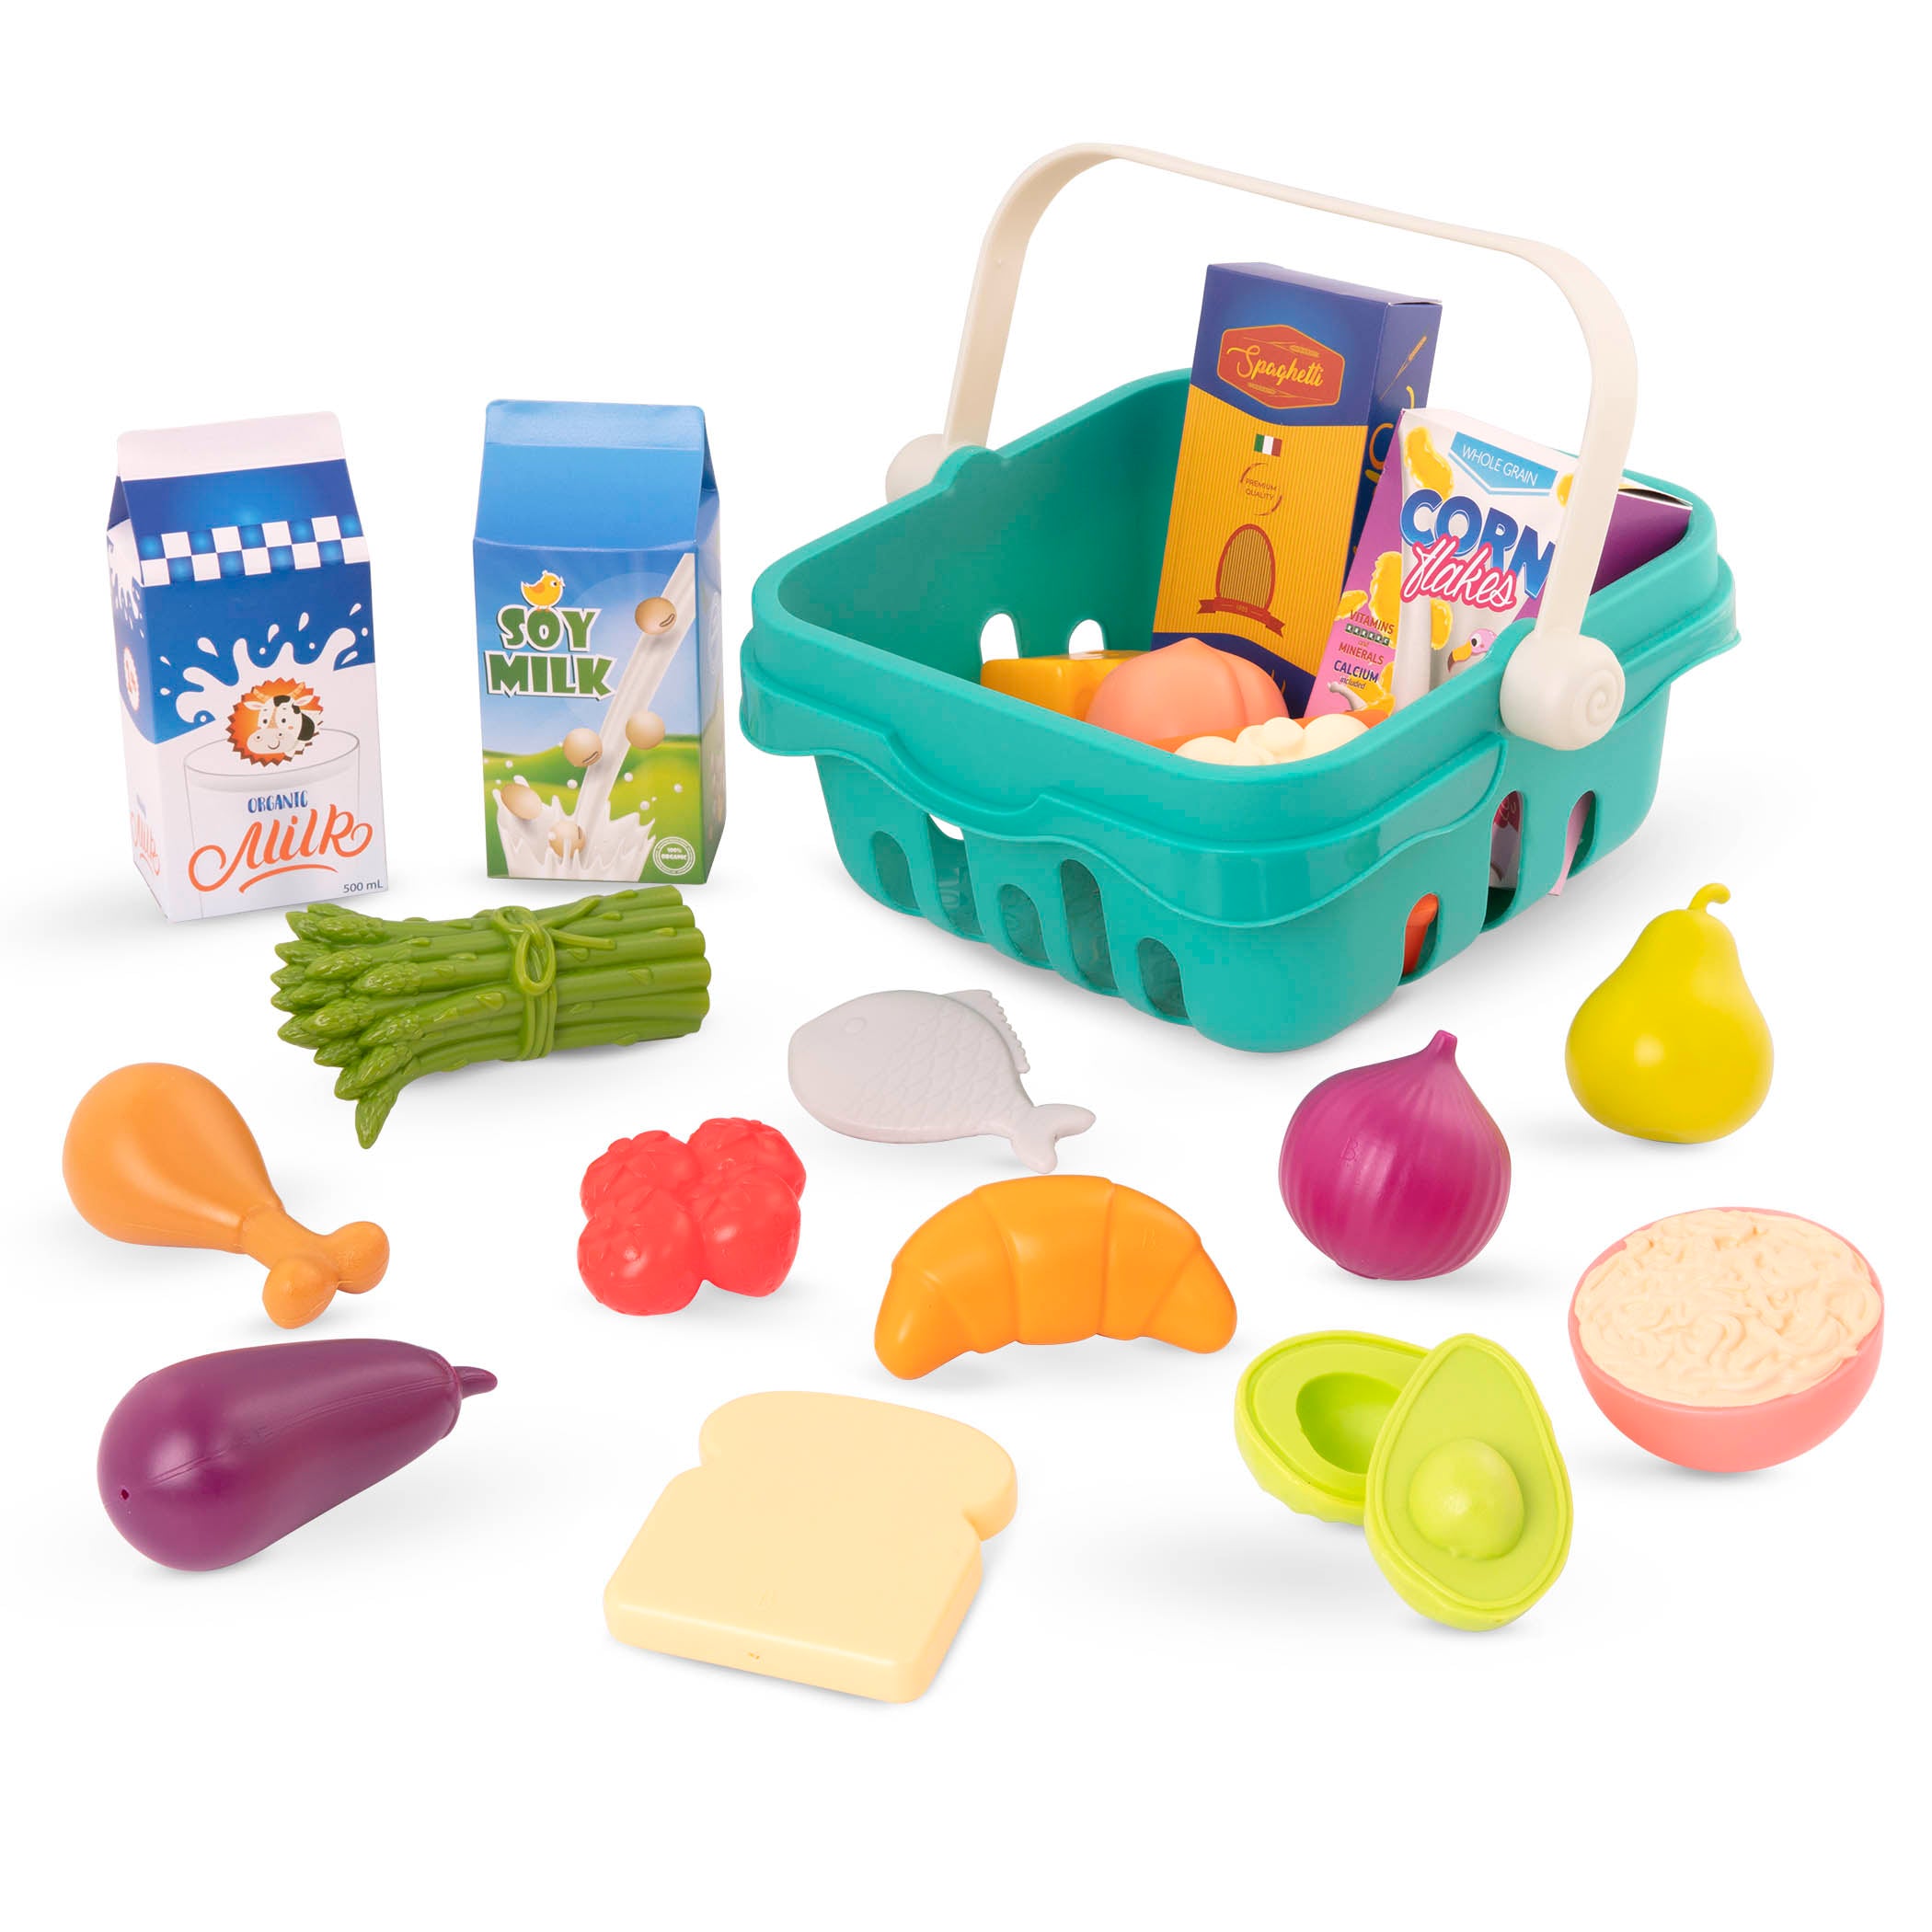 Toy shopping basket with play food.